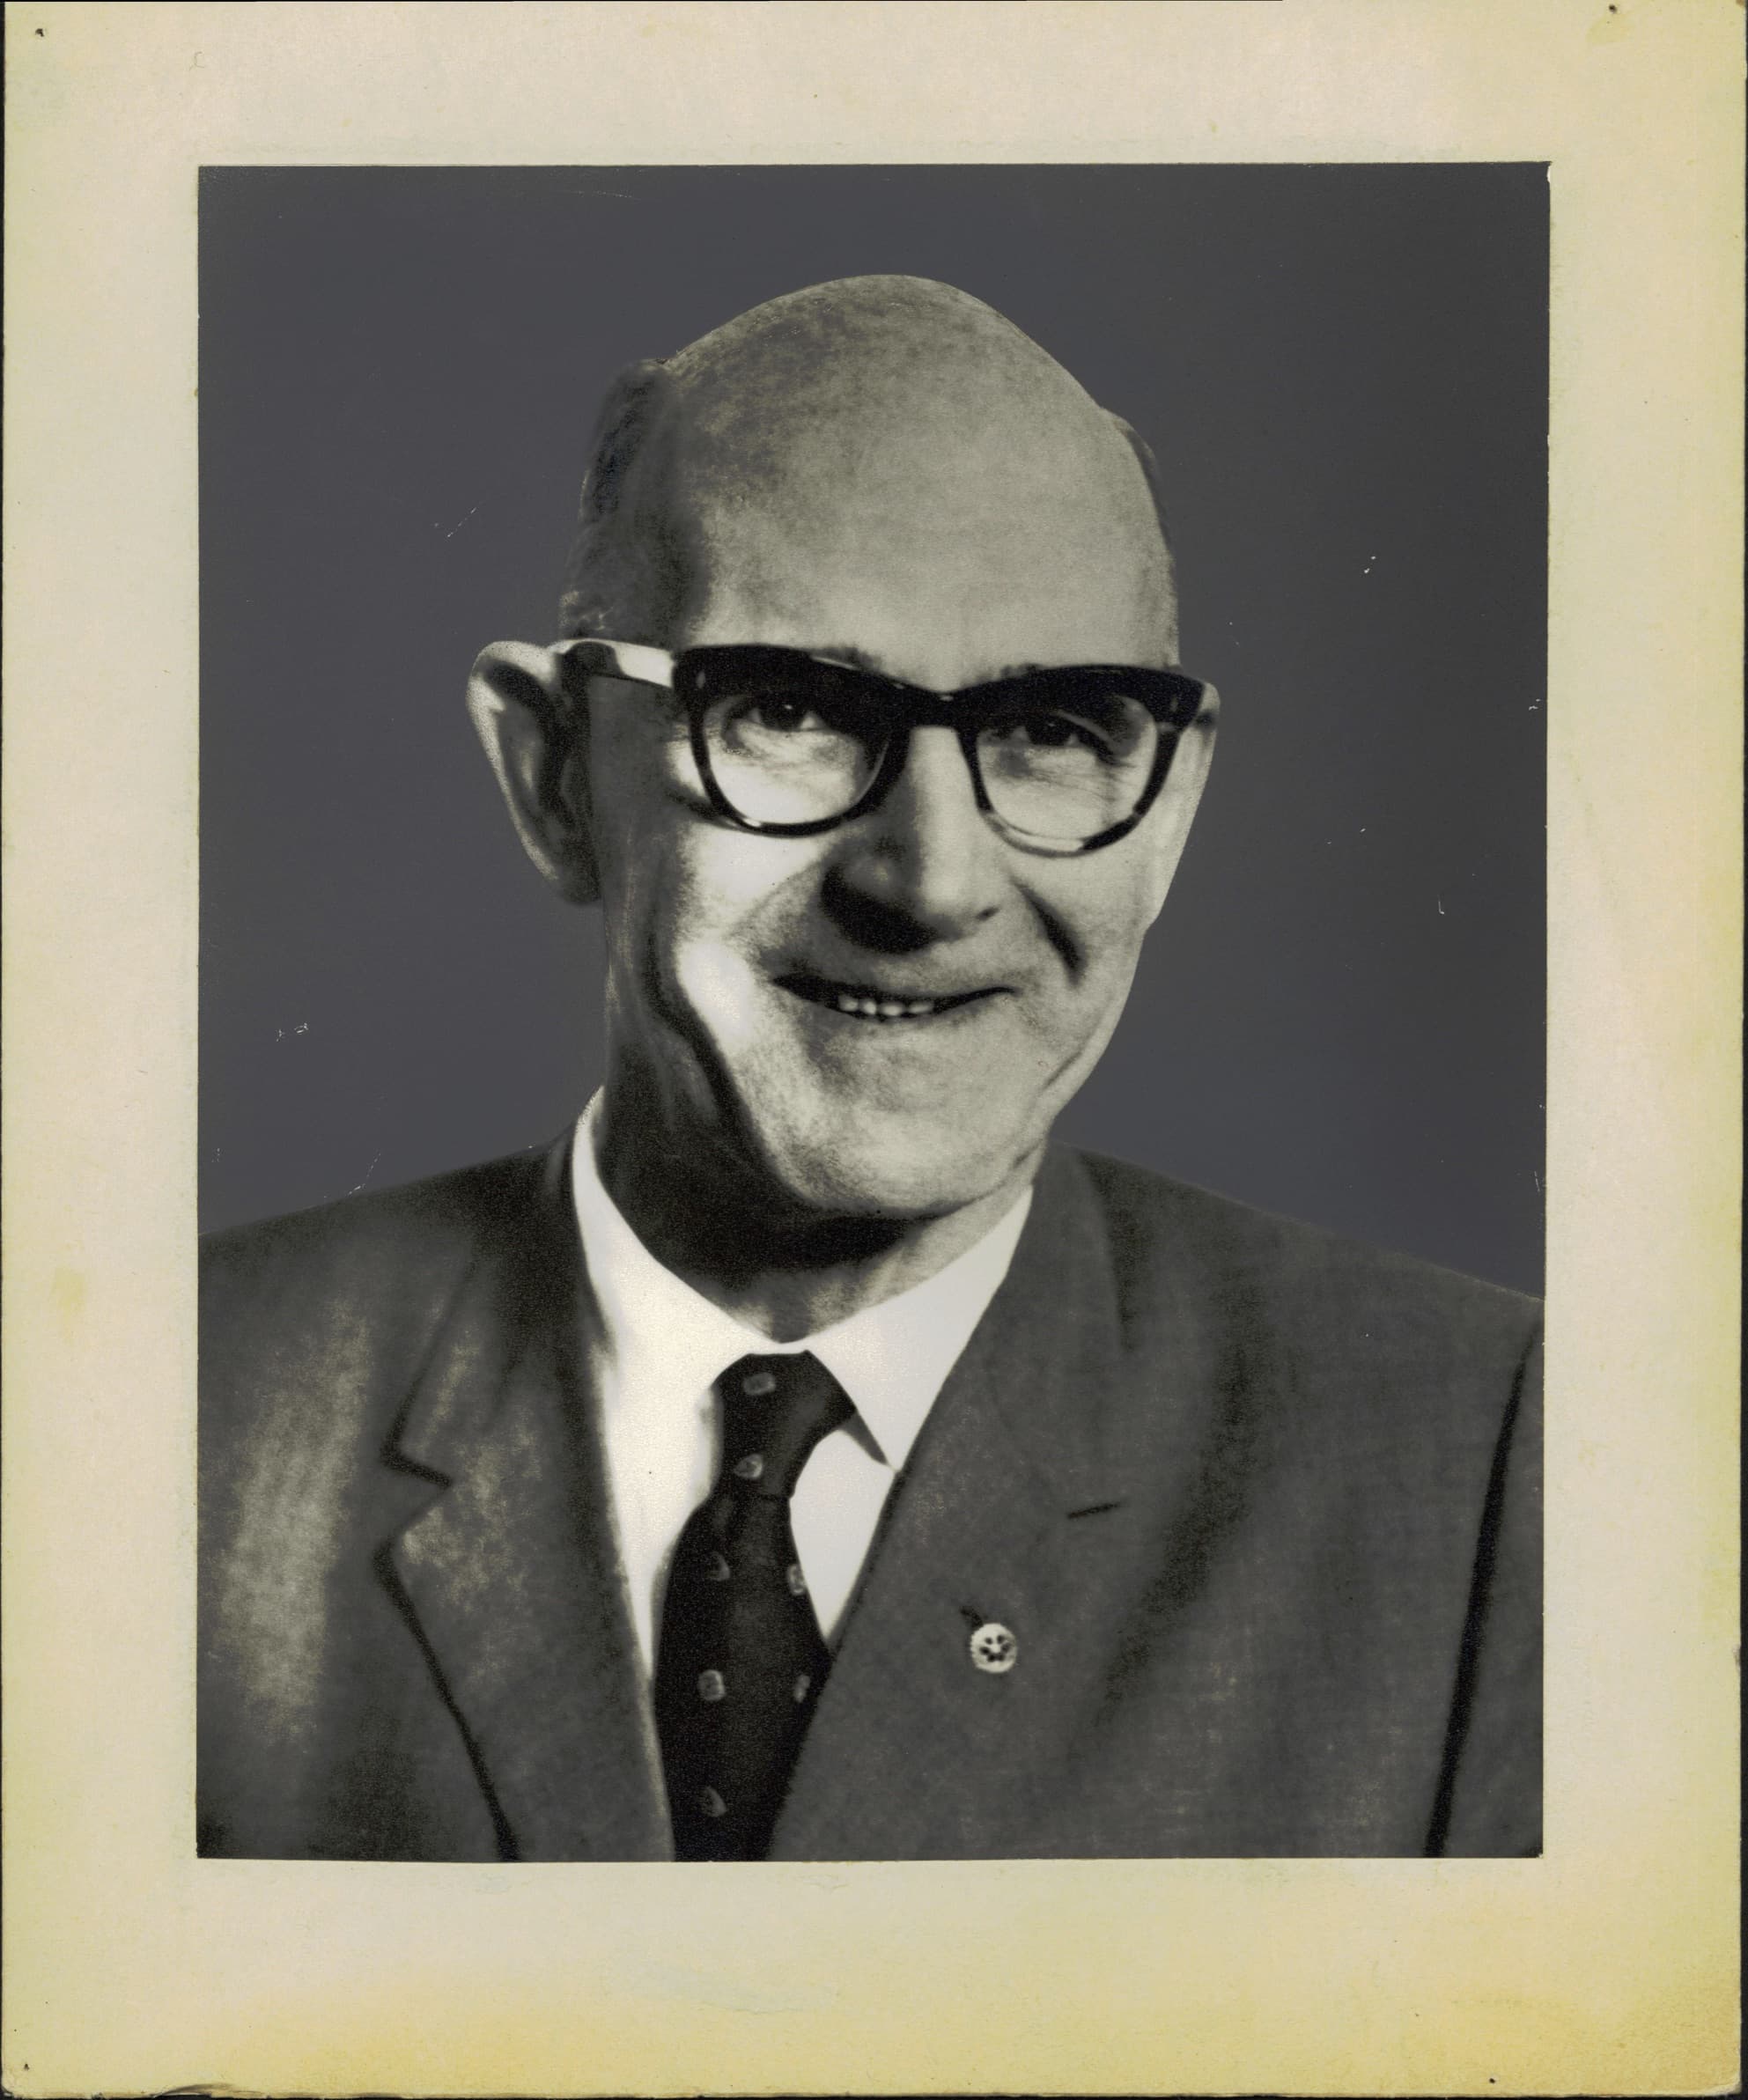 Jim Young — Commissioner from 1941 to 1953